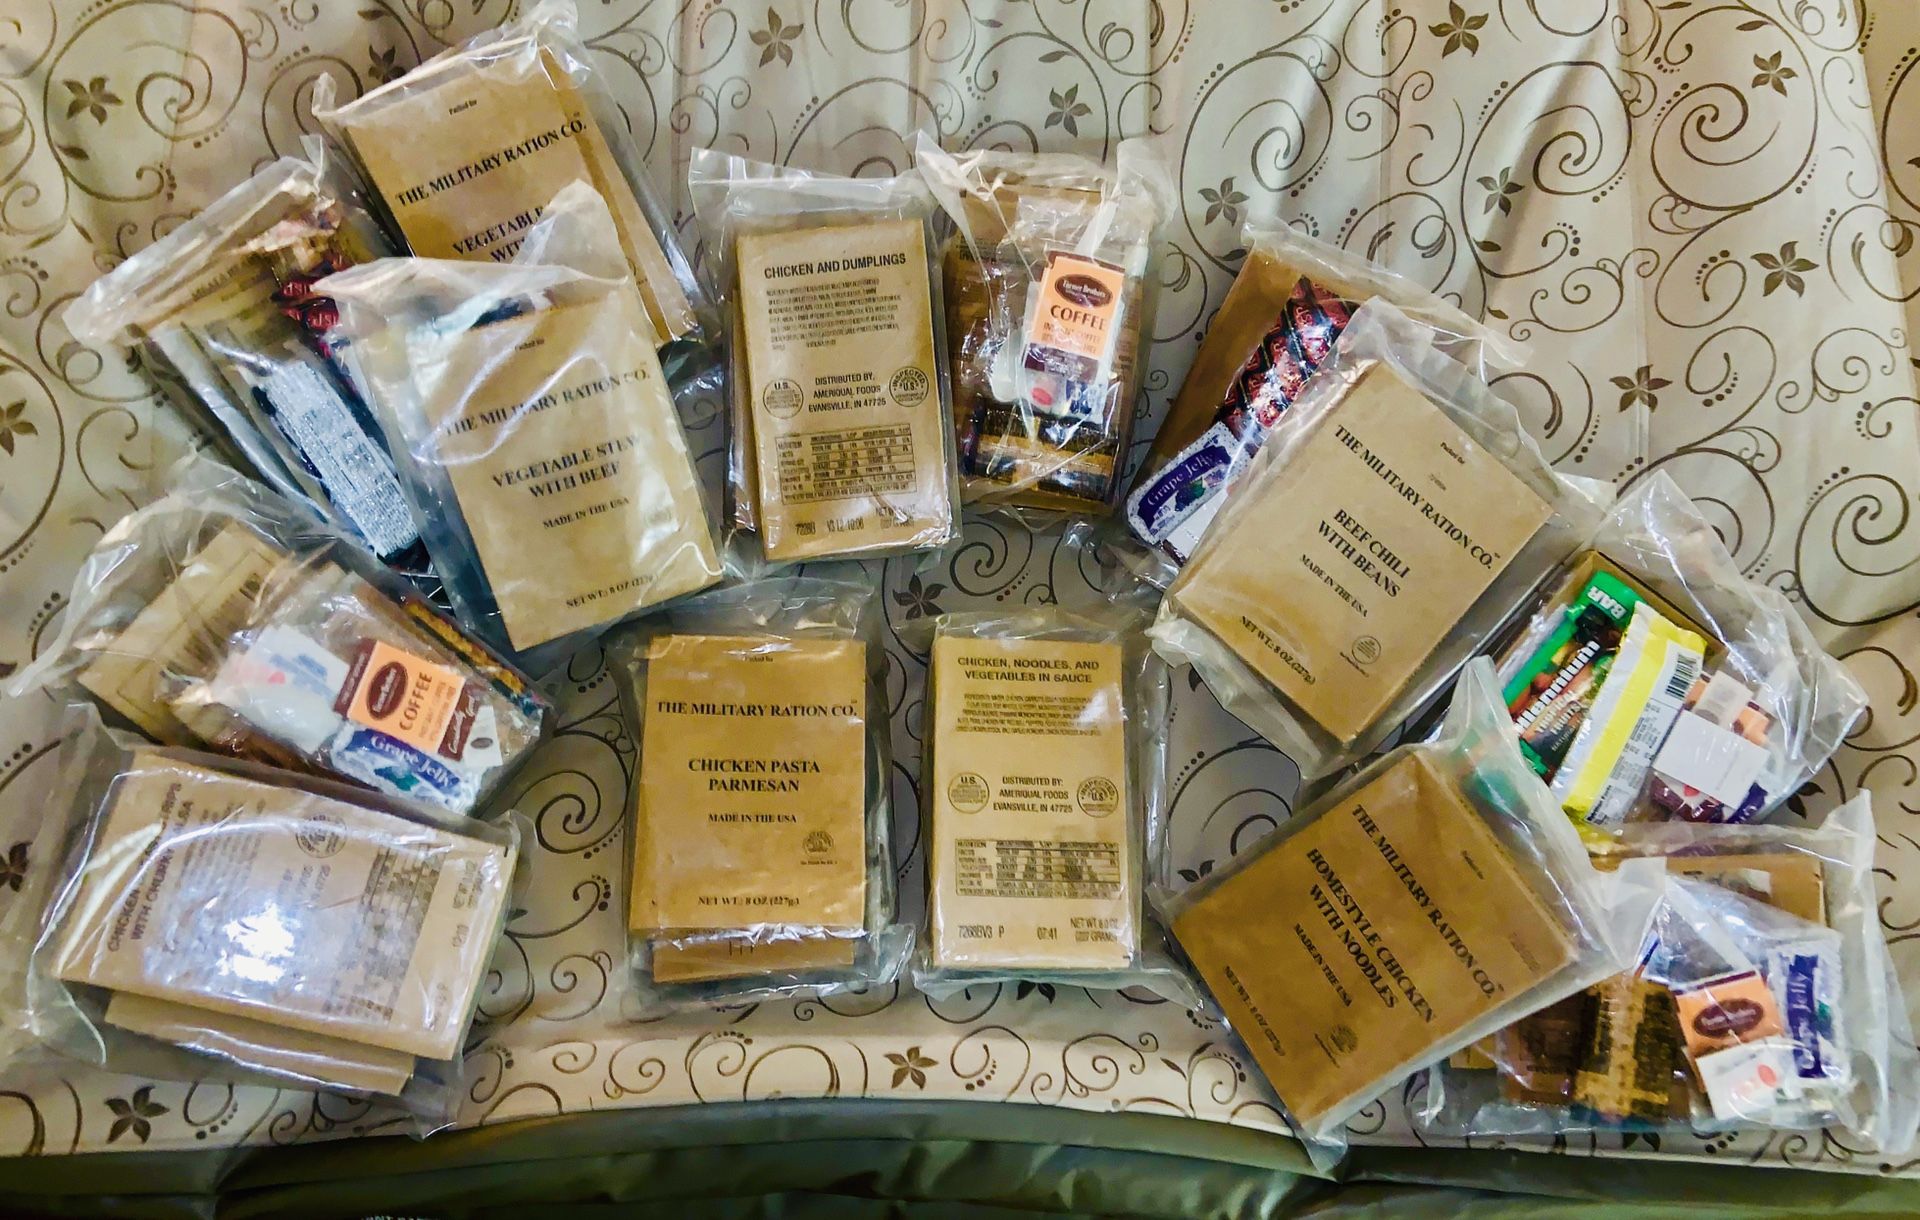 The Military Ration Co. (MRE’s)